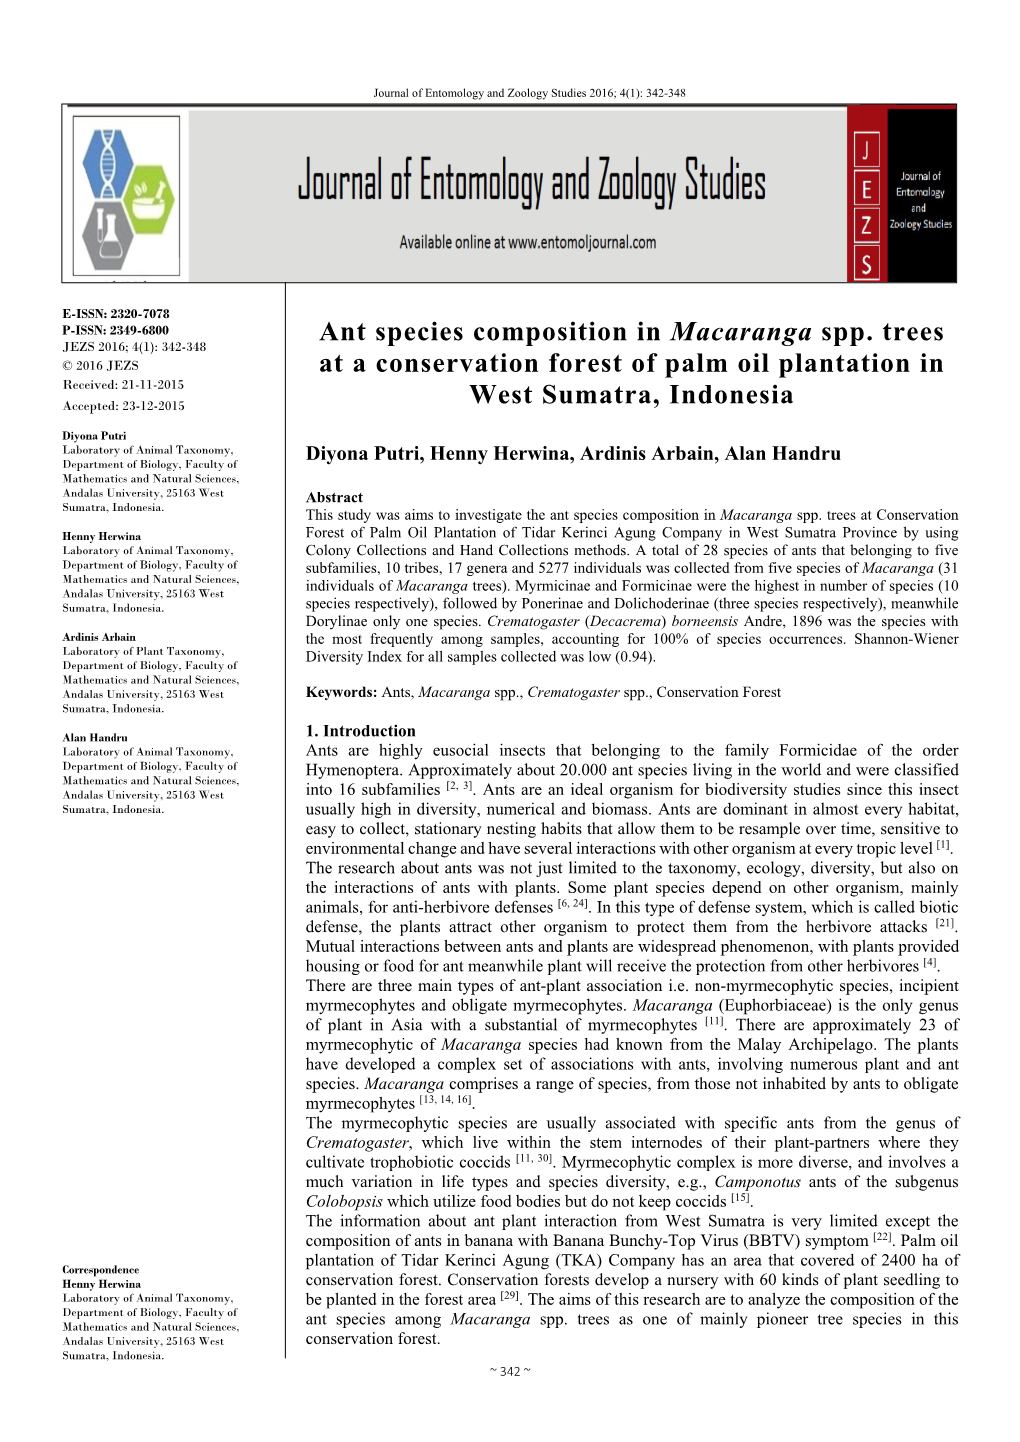 Ant Species Composition in Macaranga Spp. Trees at A